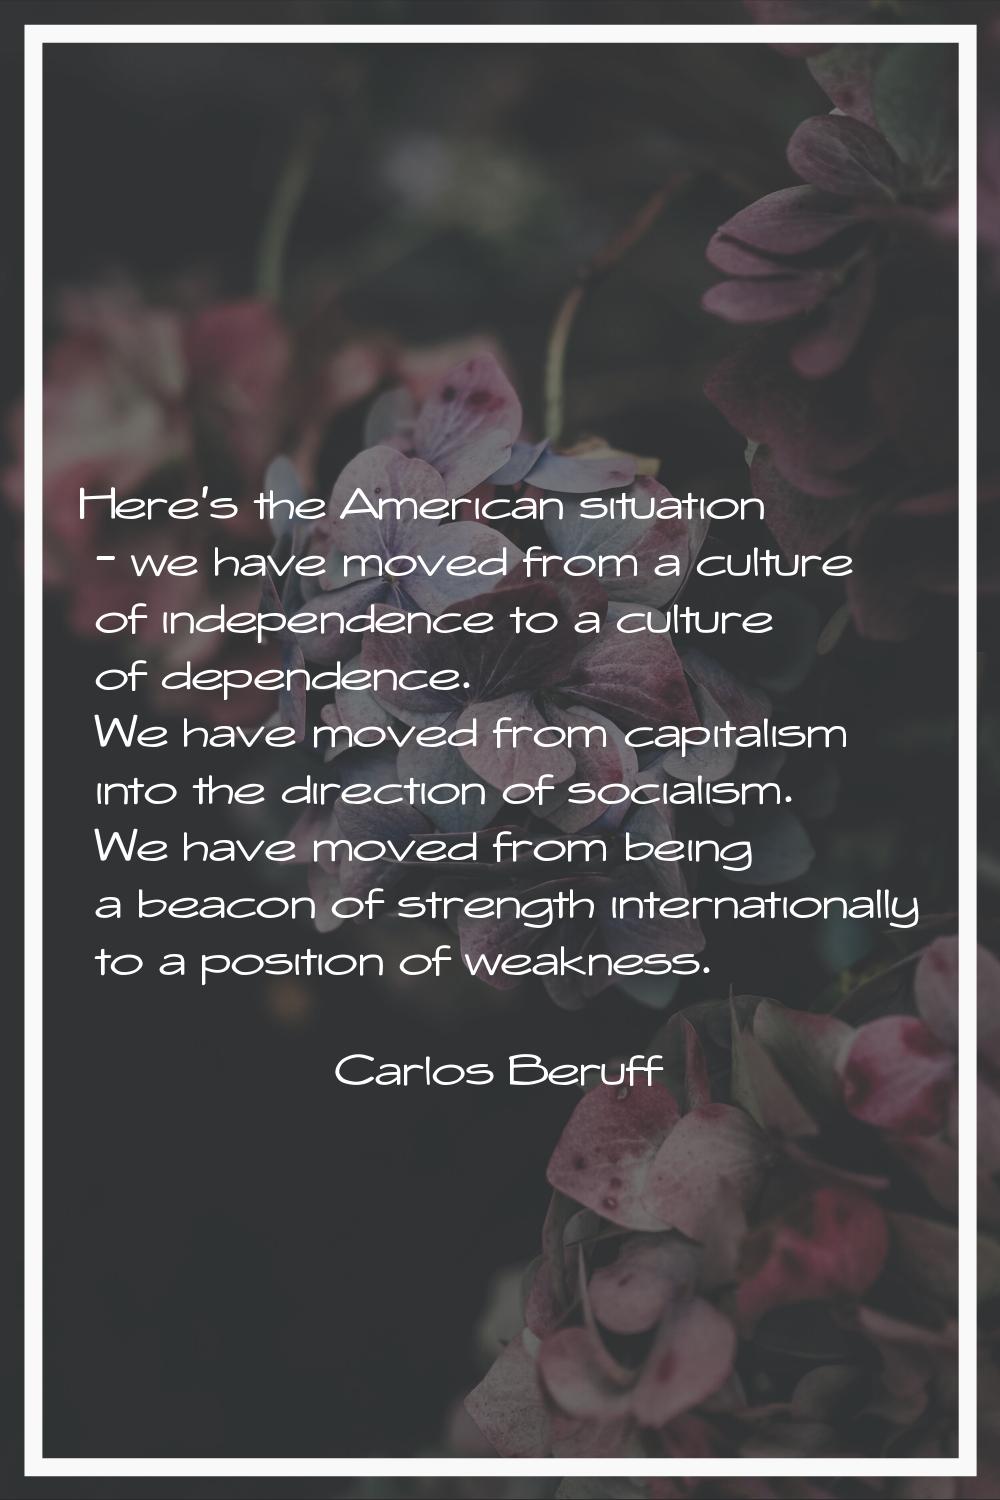 Here's the American situation - we have moved from a culture of independence to a culture of depend